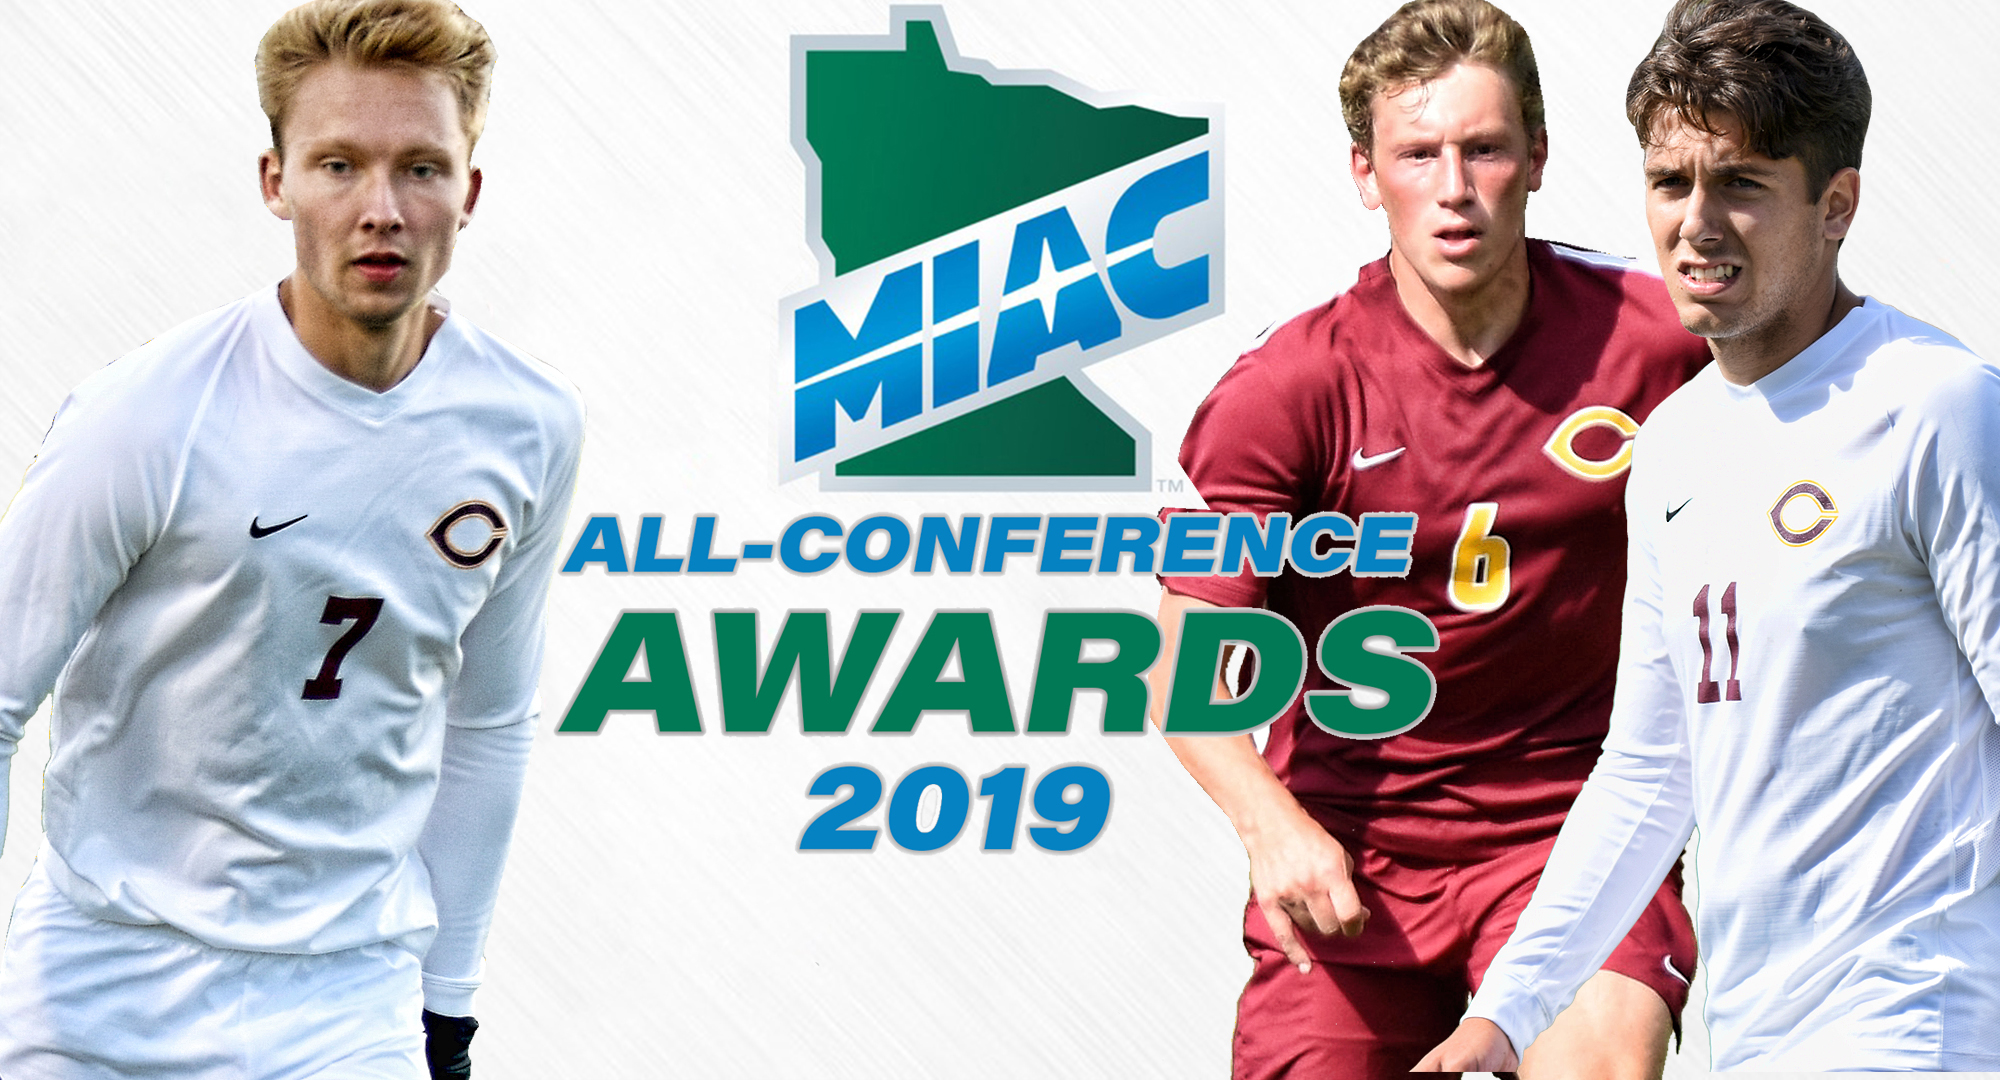 Sam Gess (L), Henry Schaefer and Nate Weaver all earned MIAC postseason honors for the first time in their careers.